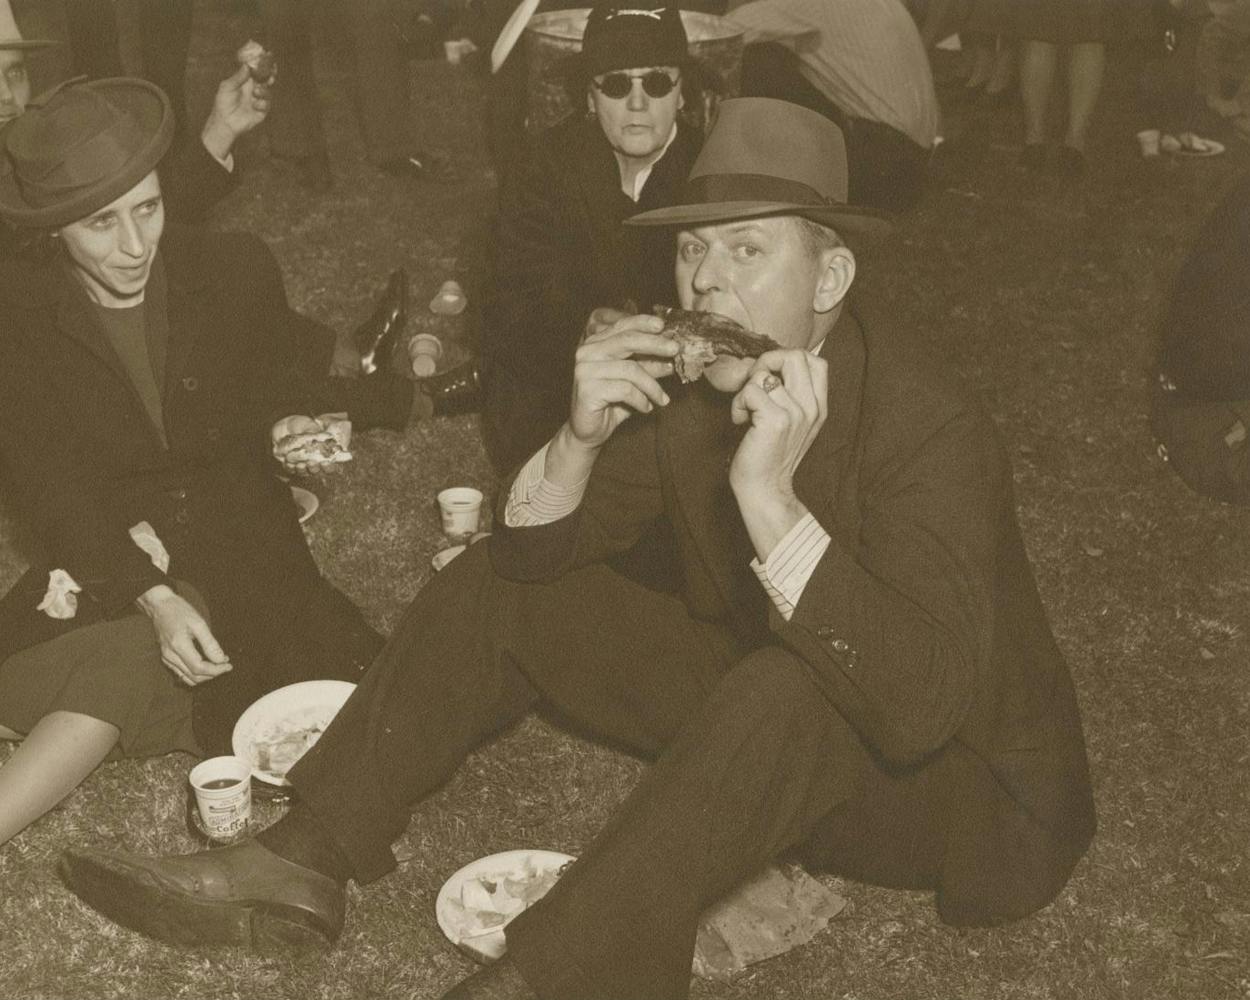 A man sitting on the ground, eating barbecue ribs, in the early 1940s.